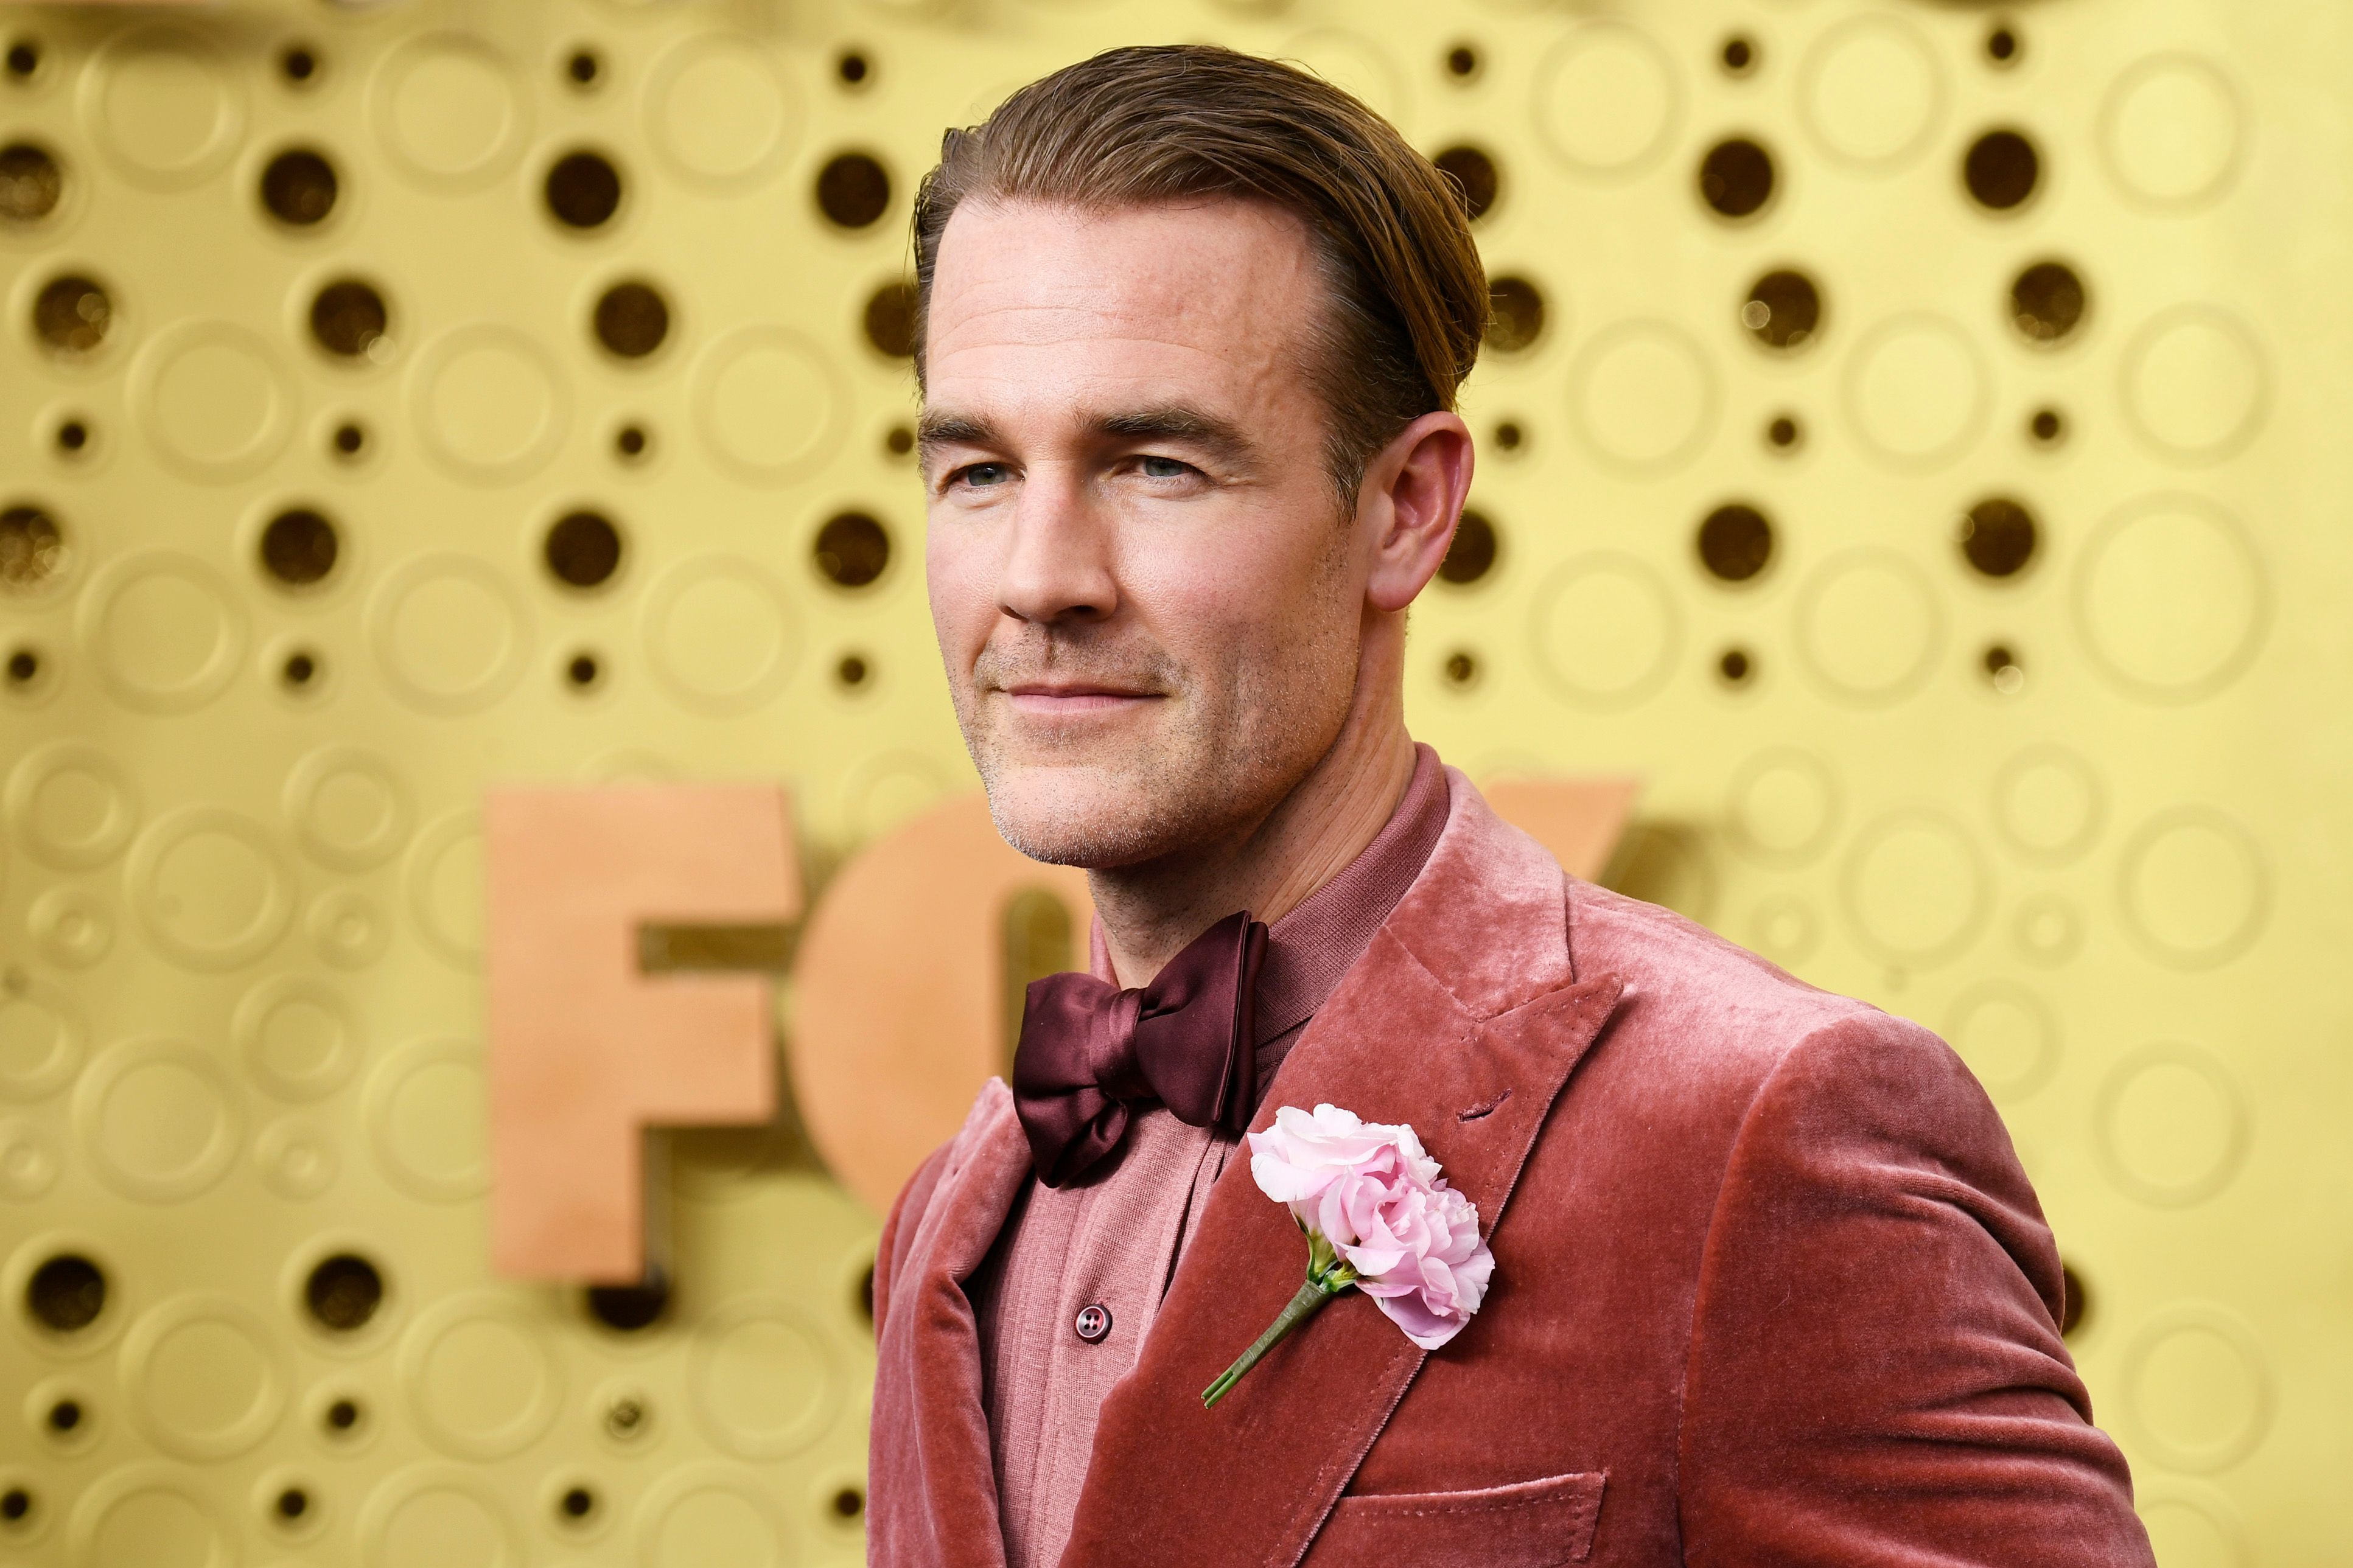 James Van Der Beek at the 71st Emmy Awards at Microsoft Theater on September 22, 2019 in Los Angeles, California. | Photo: Getty Images